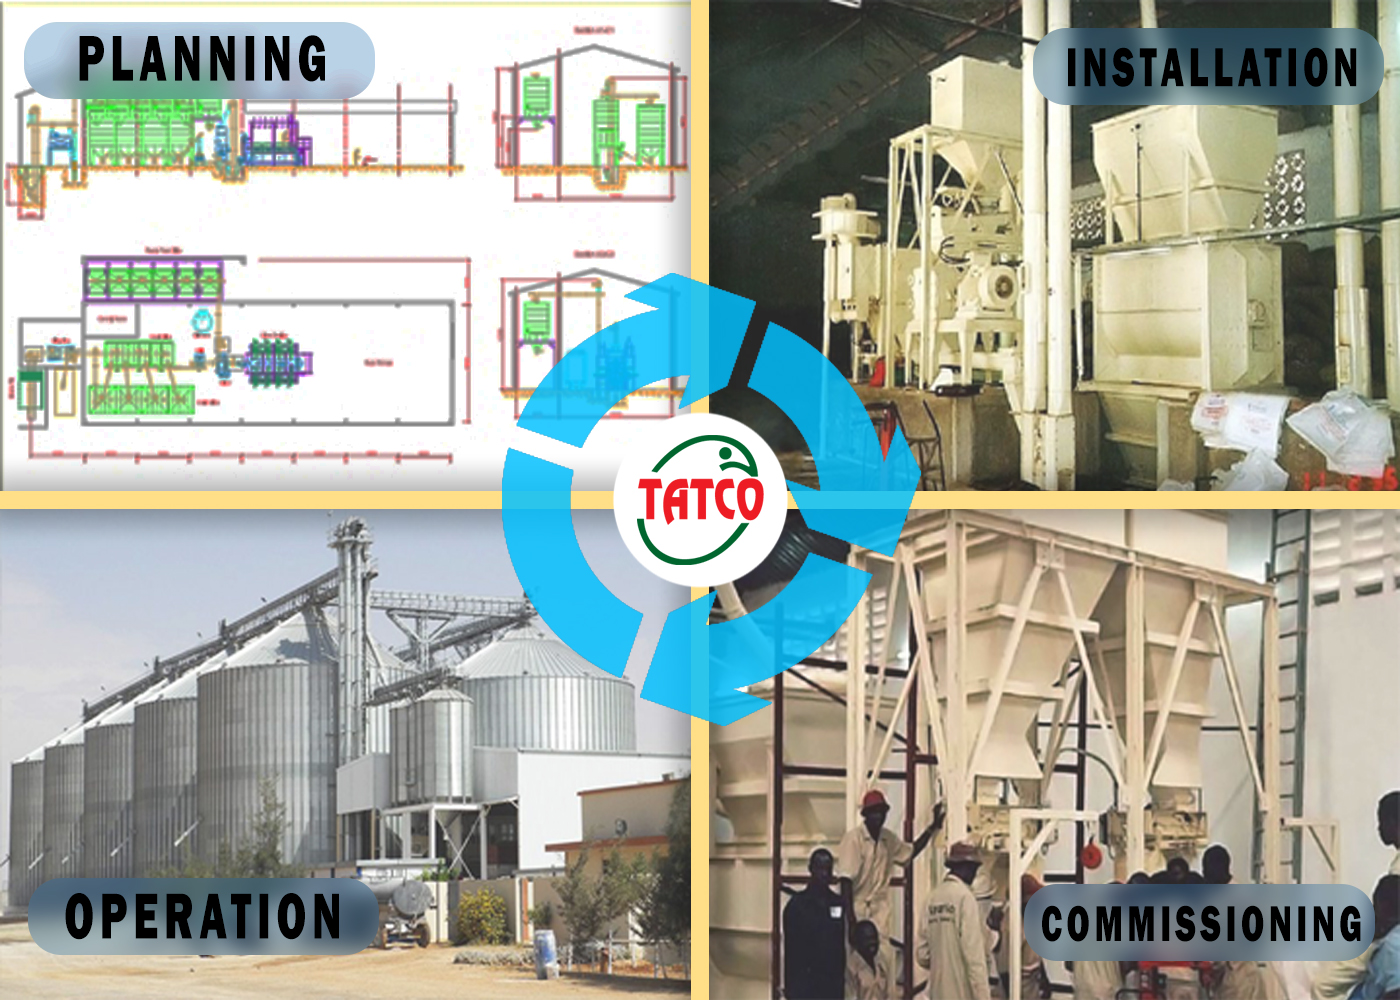 Tatco Project Implementation